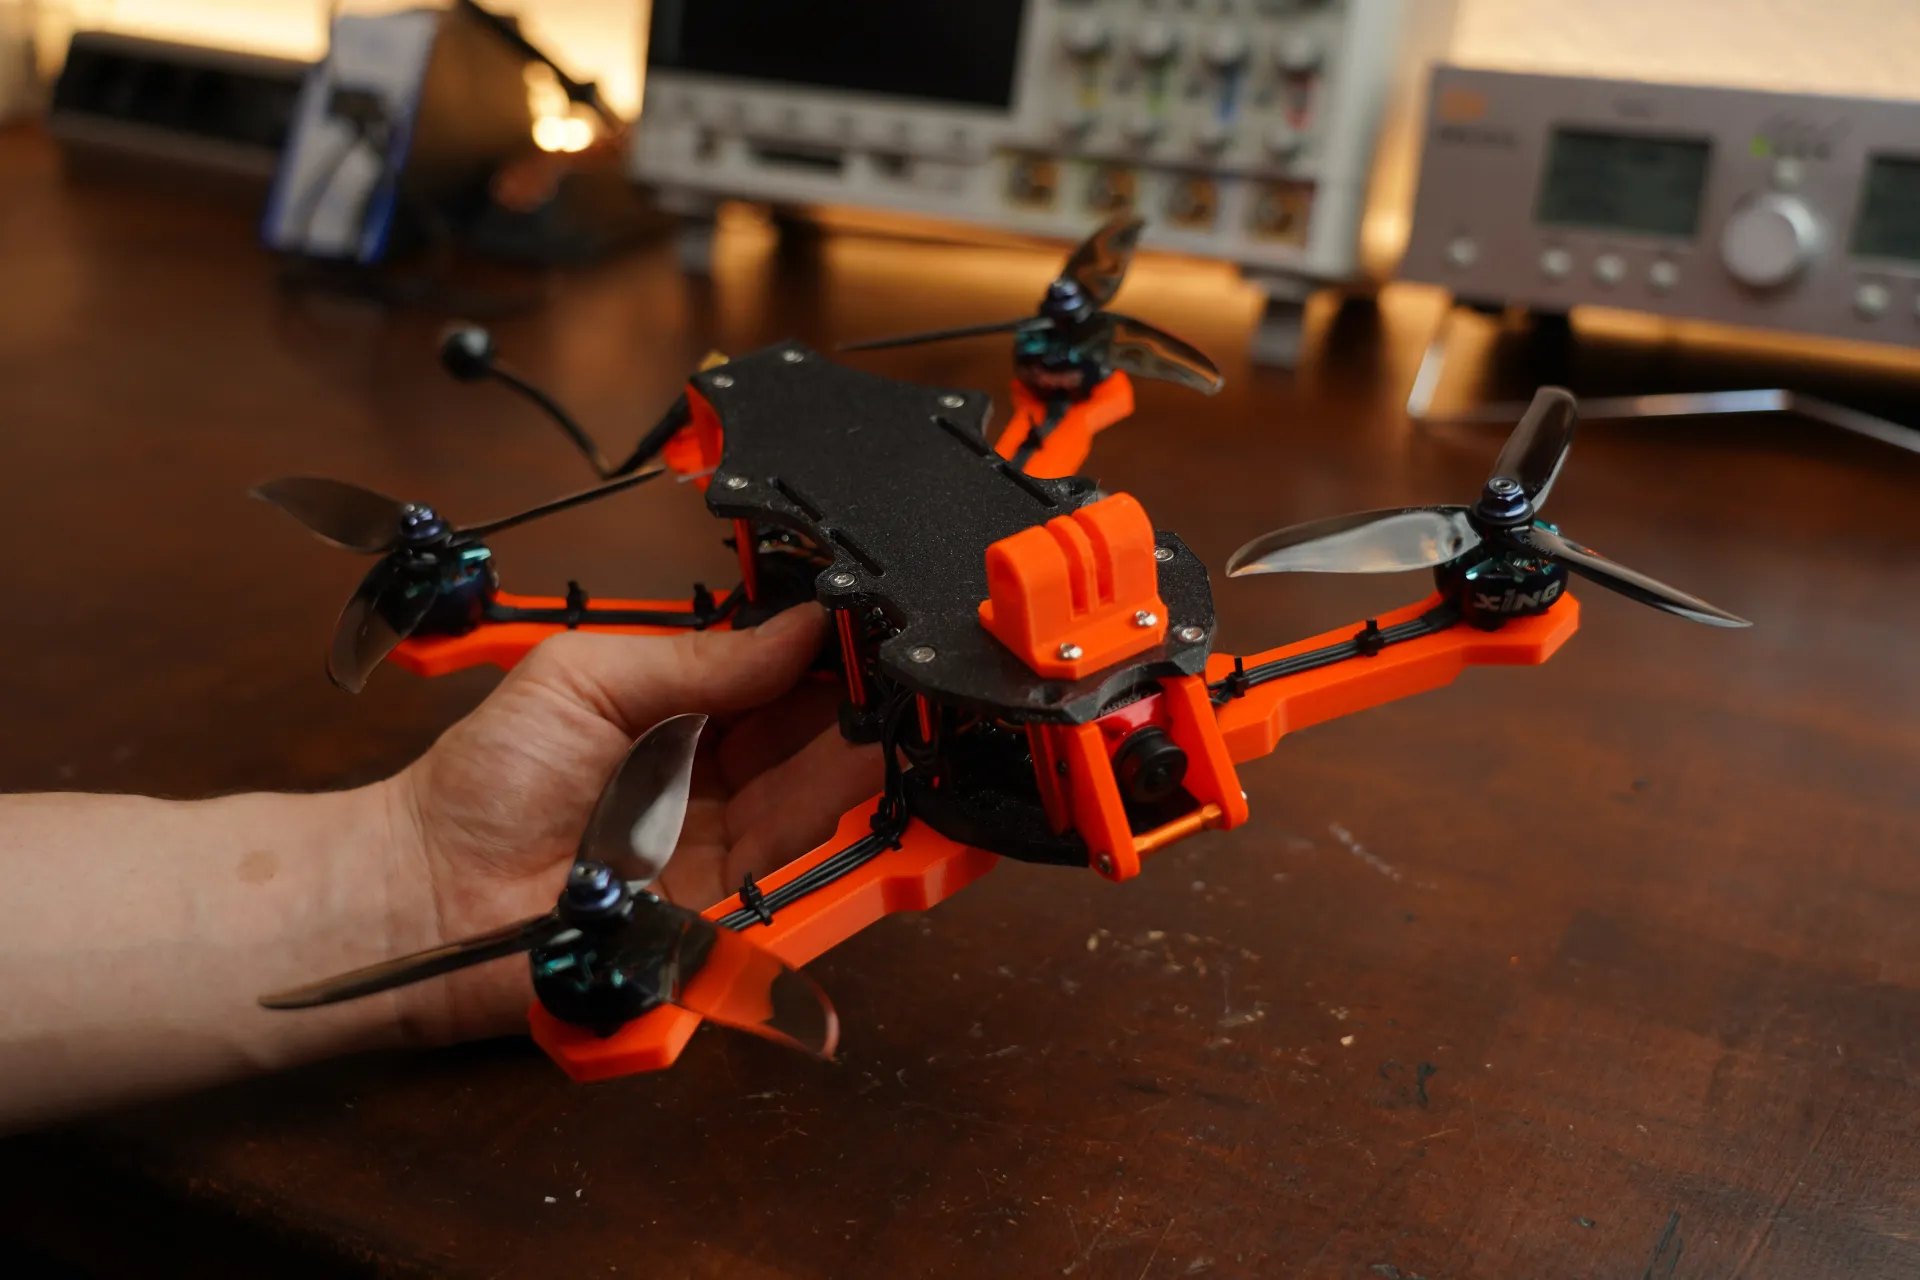 FPV drone - featured on GreatScott!